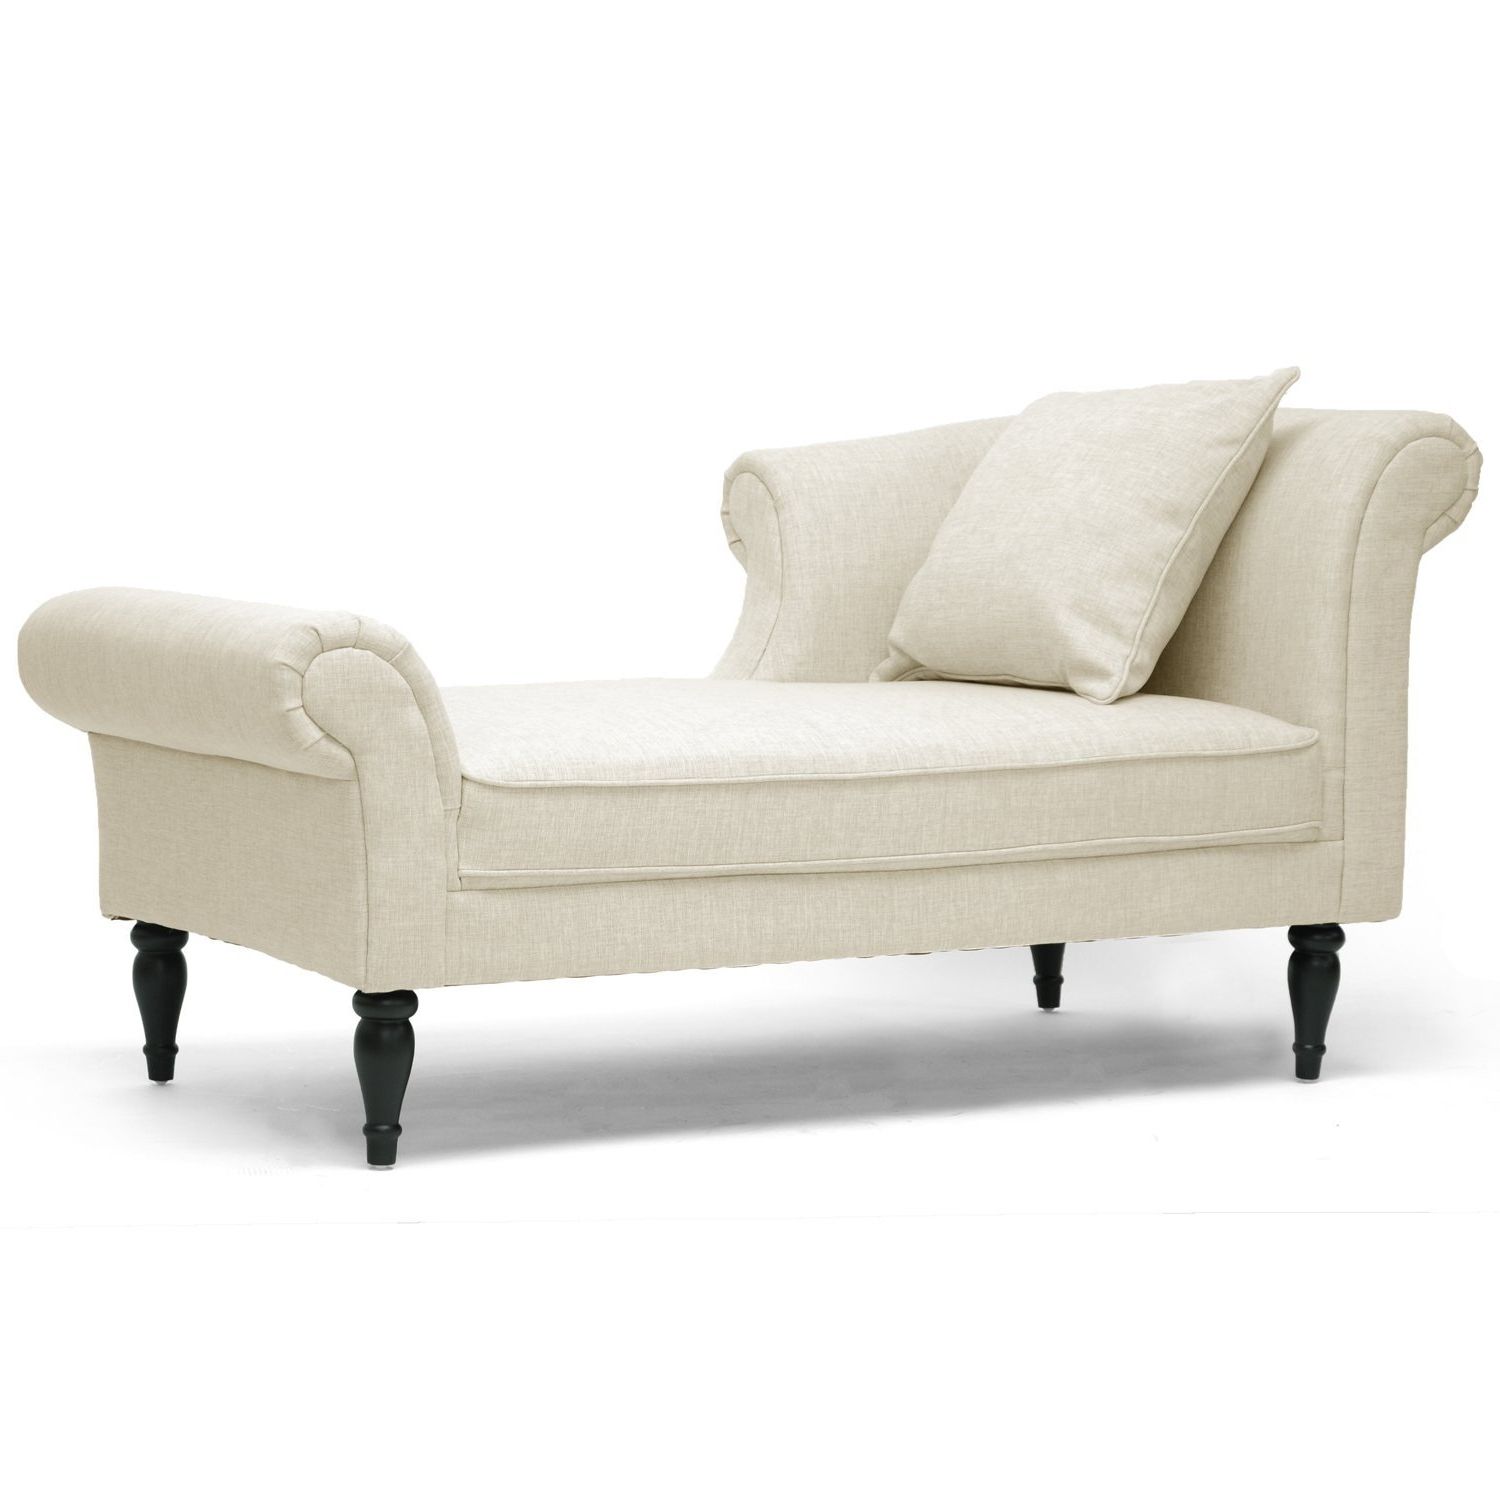 Sleeper Chaises Within Newest Fresh Chaise Lounge Sofa Bed # (View 14 of 15)